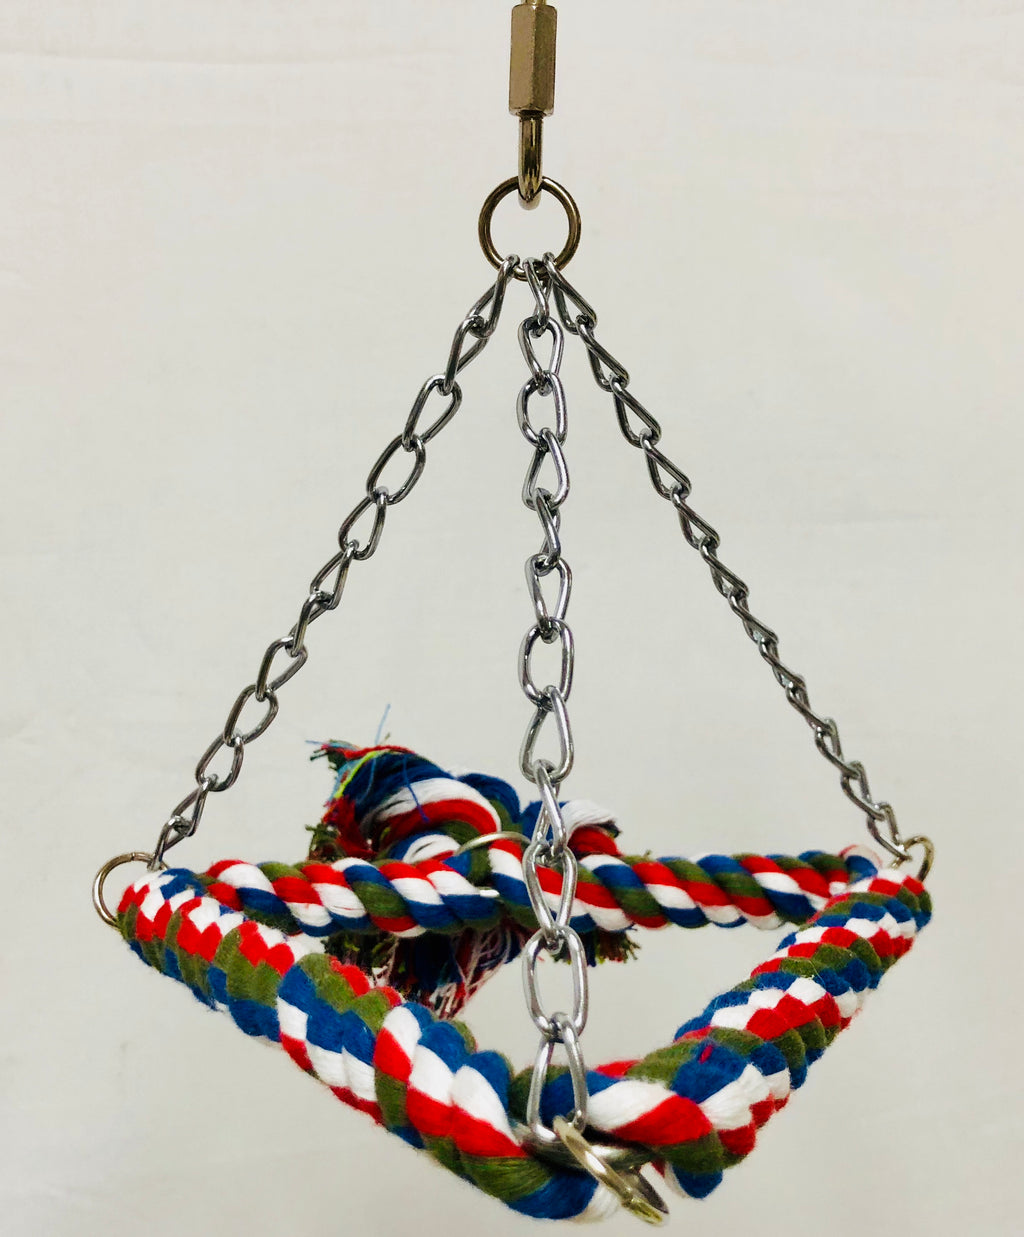 Tri-Chain Rope Swing - Small